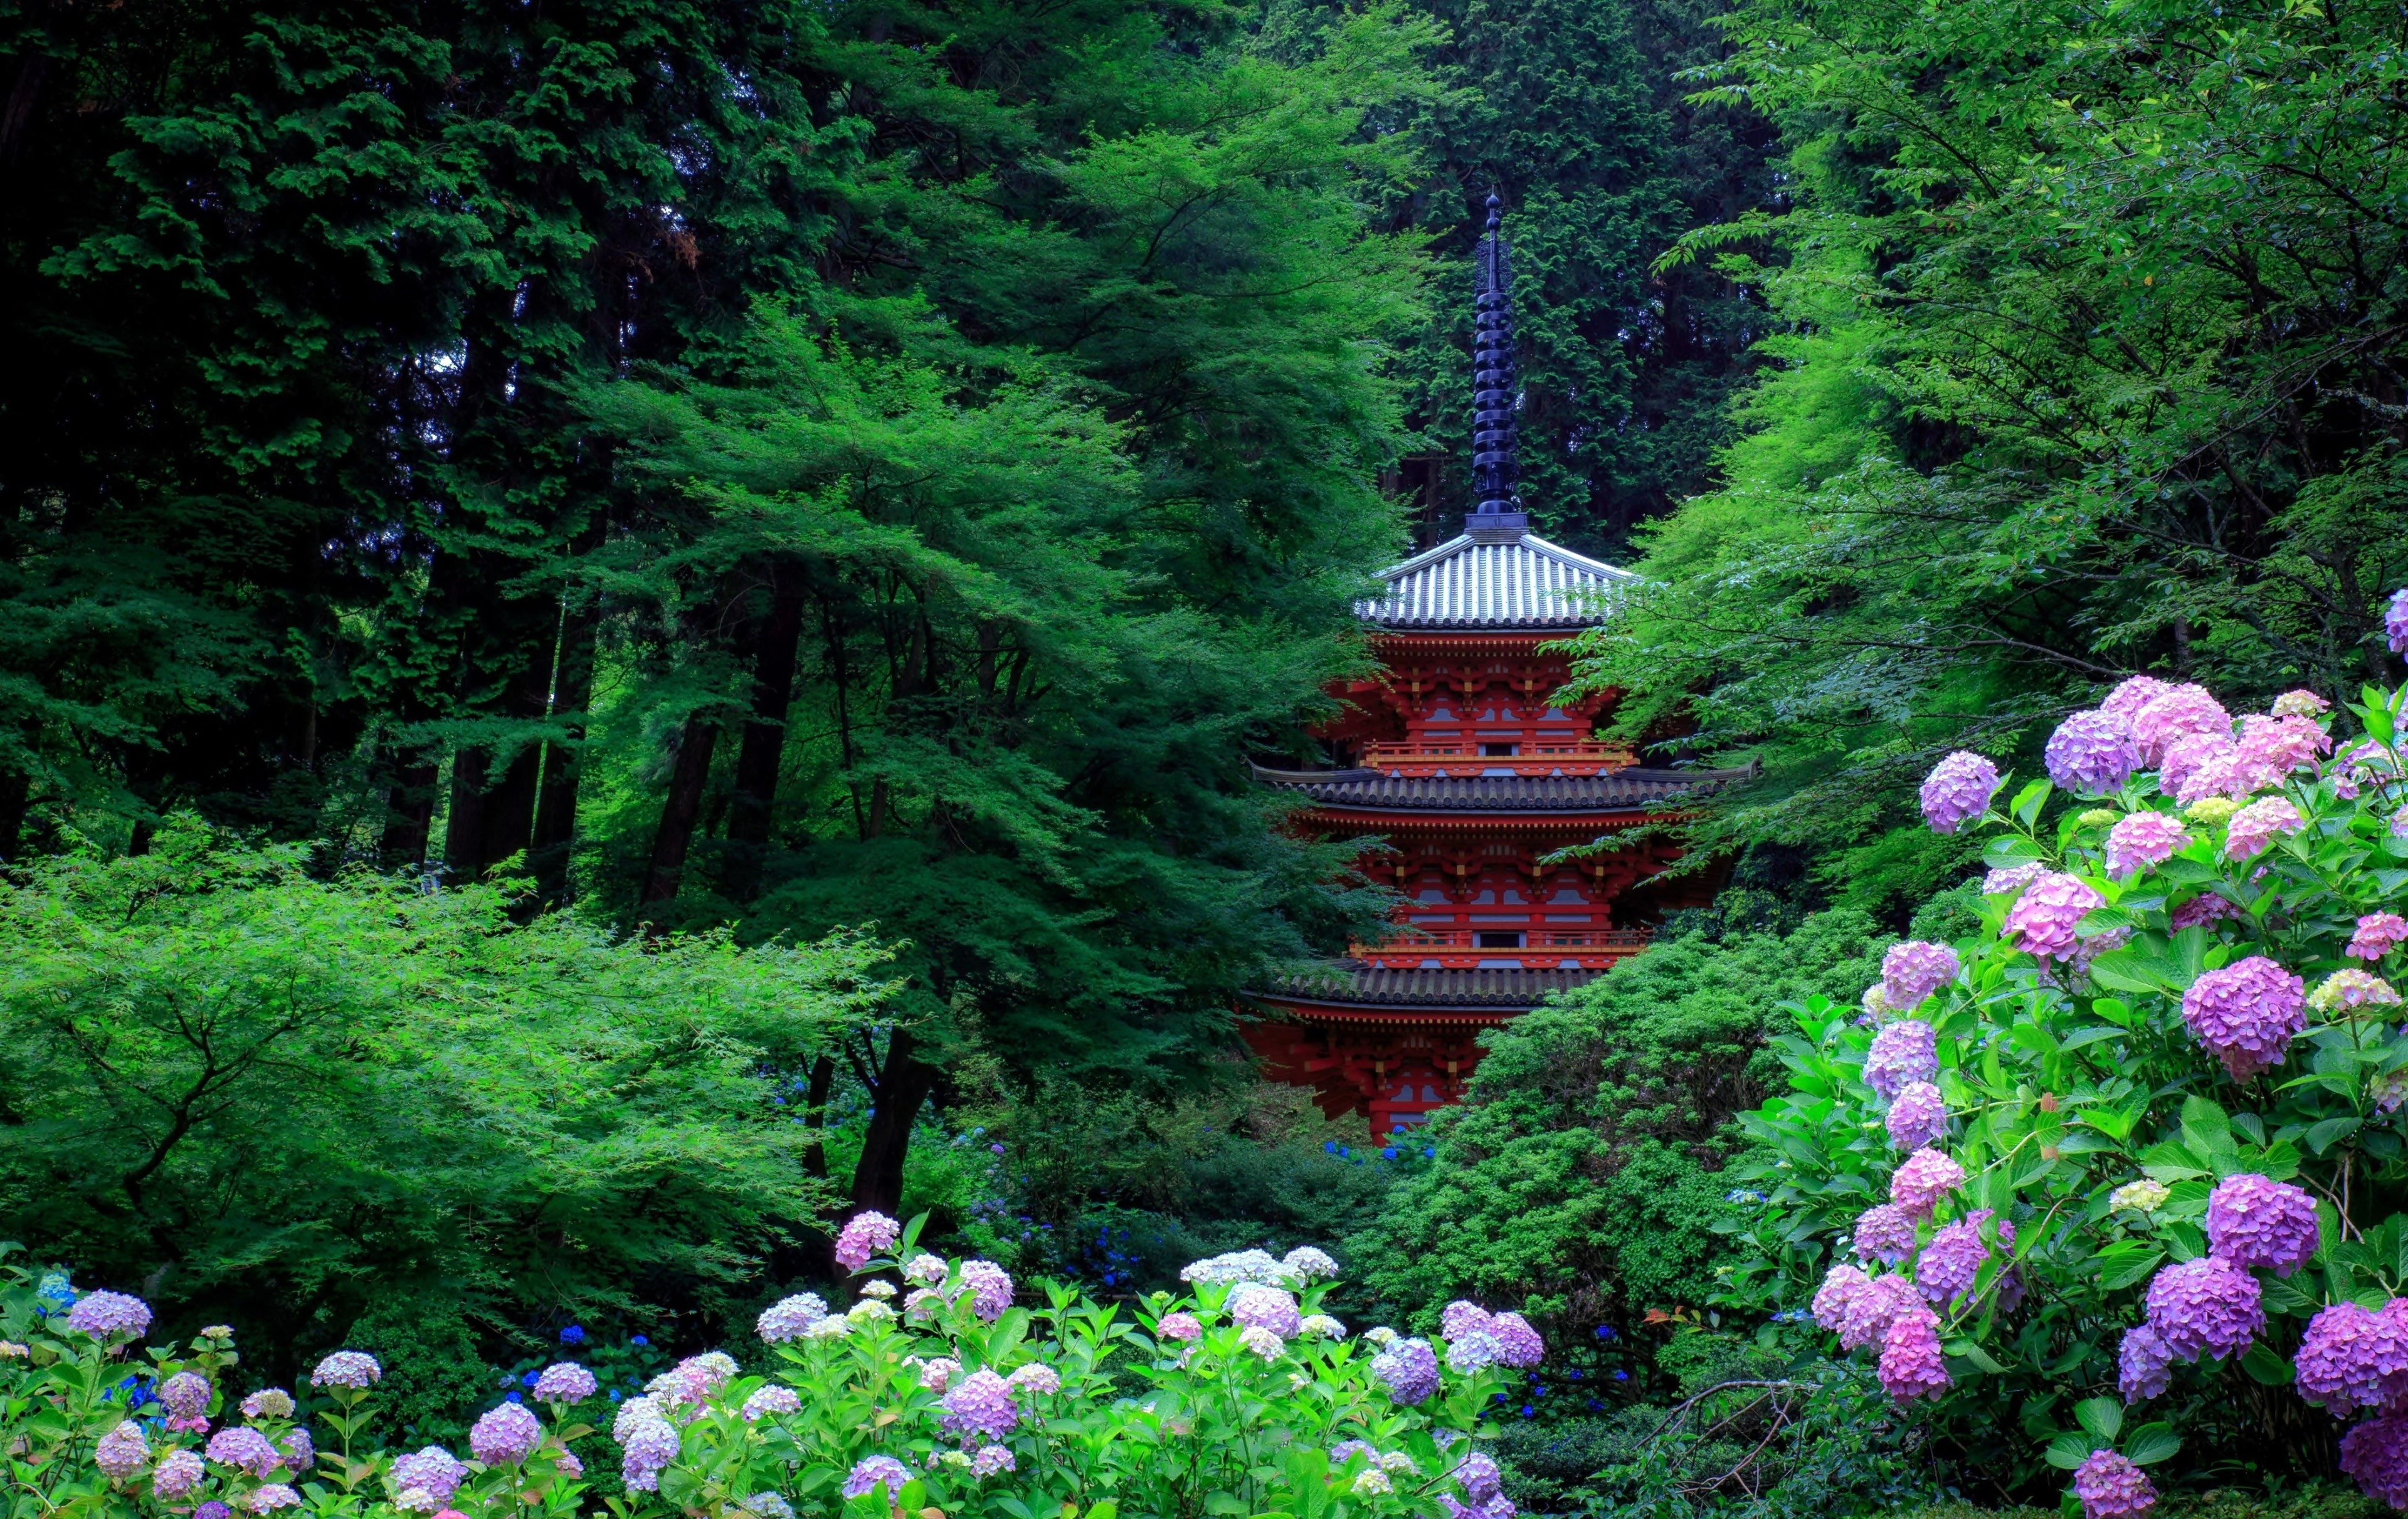 General 3840x2423 Asian architecture trees forest plants flowers leaves hydrangea